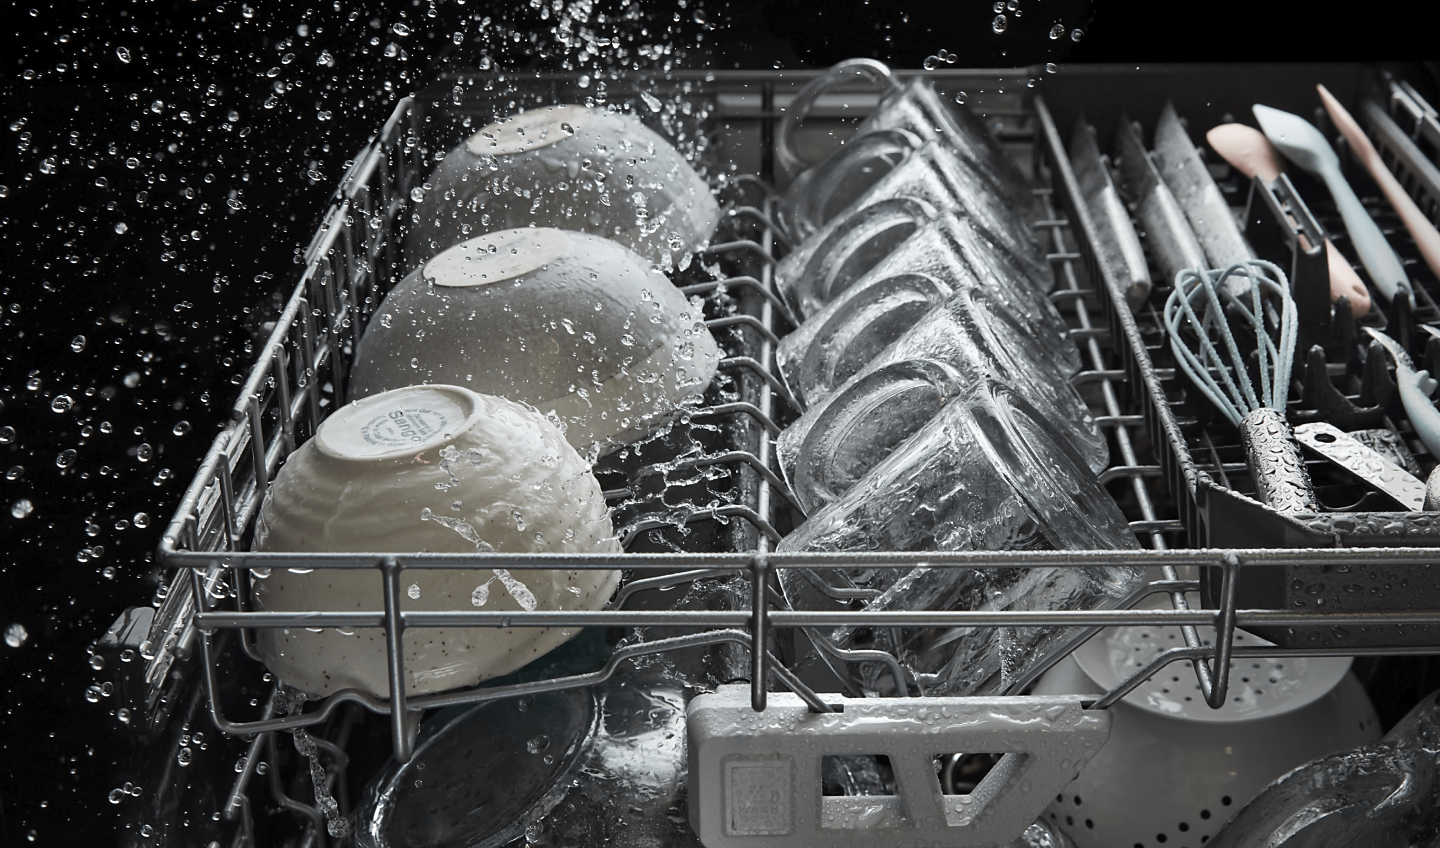 A dishwasher rack filled with dishes being cleaned